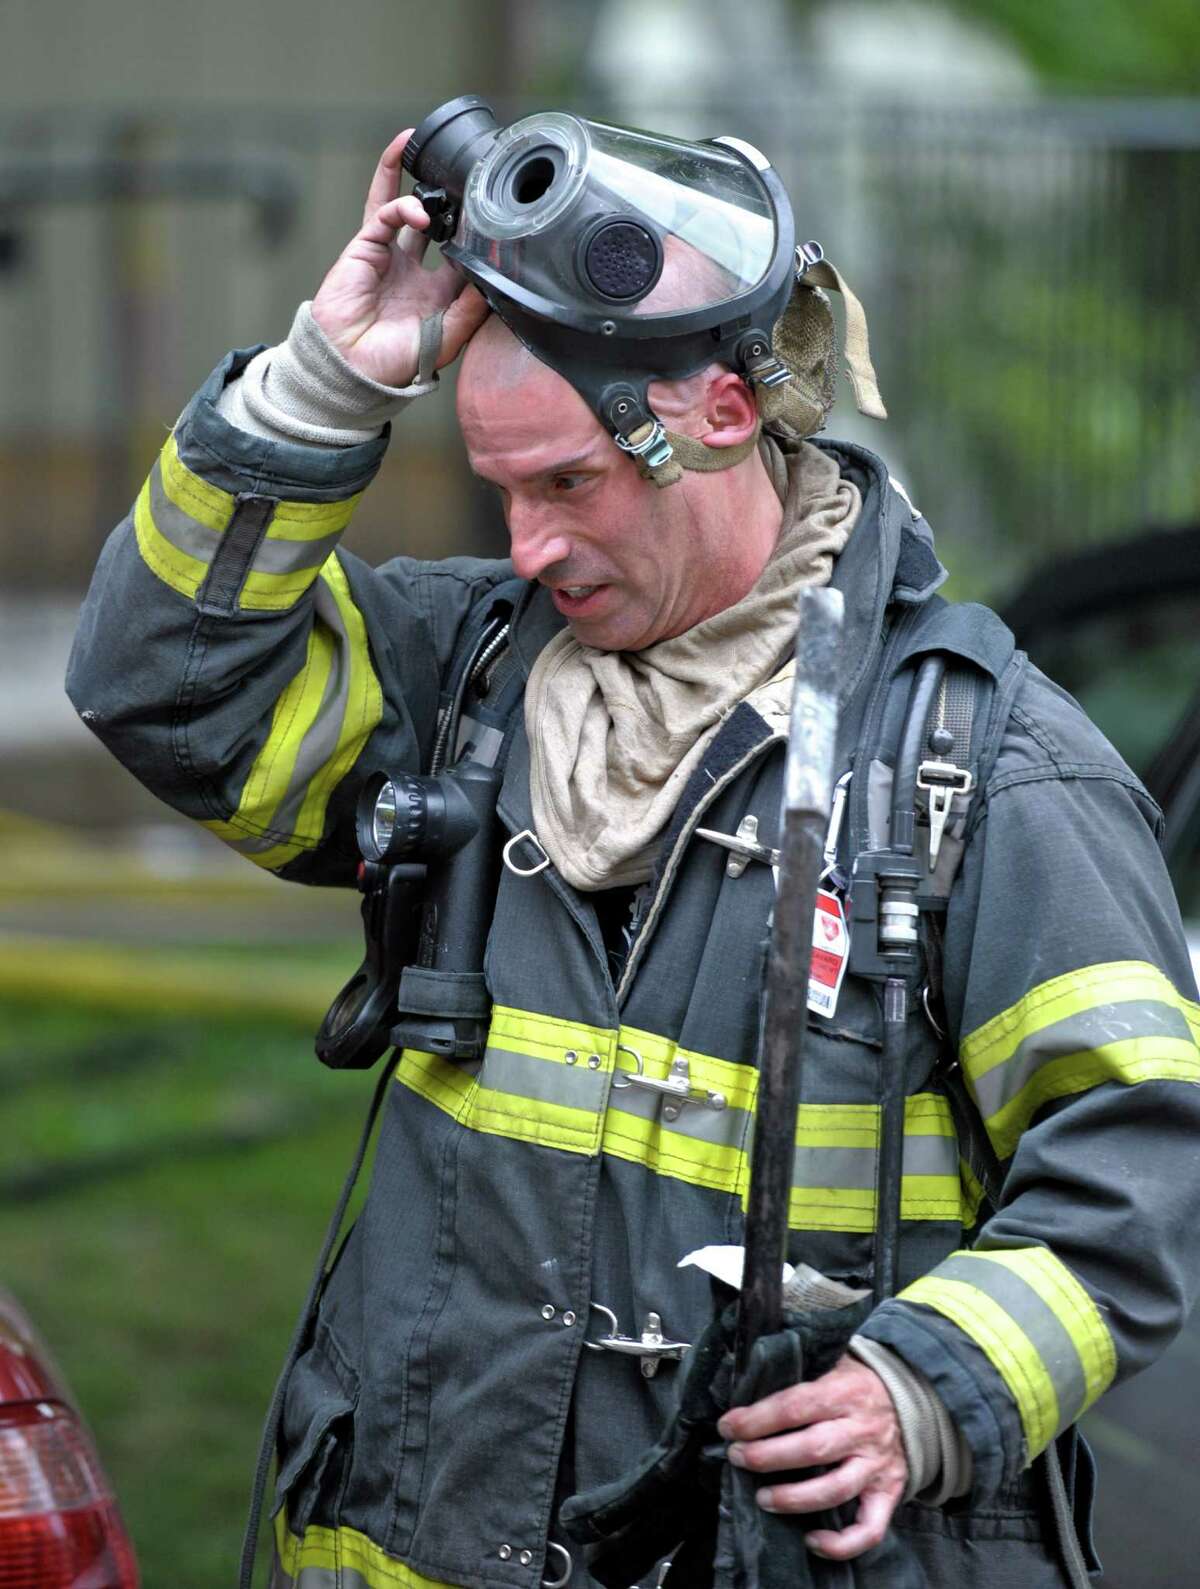 Danbury fire fighter Ken Monteavaro removes his mask after leaving a condominium, on Crows Nest Lane, in Danbury, Conn, where there was a fire on Saturday afternoon, June 27, 2015. The fire at Birchwood Condos began about 12:30 p.m. Asst. Deputy Chief Mark Omasta said.The blaze was contained to one unit and was quickly put under control.